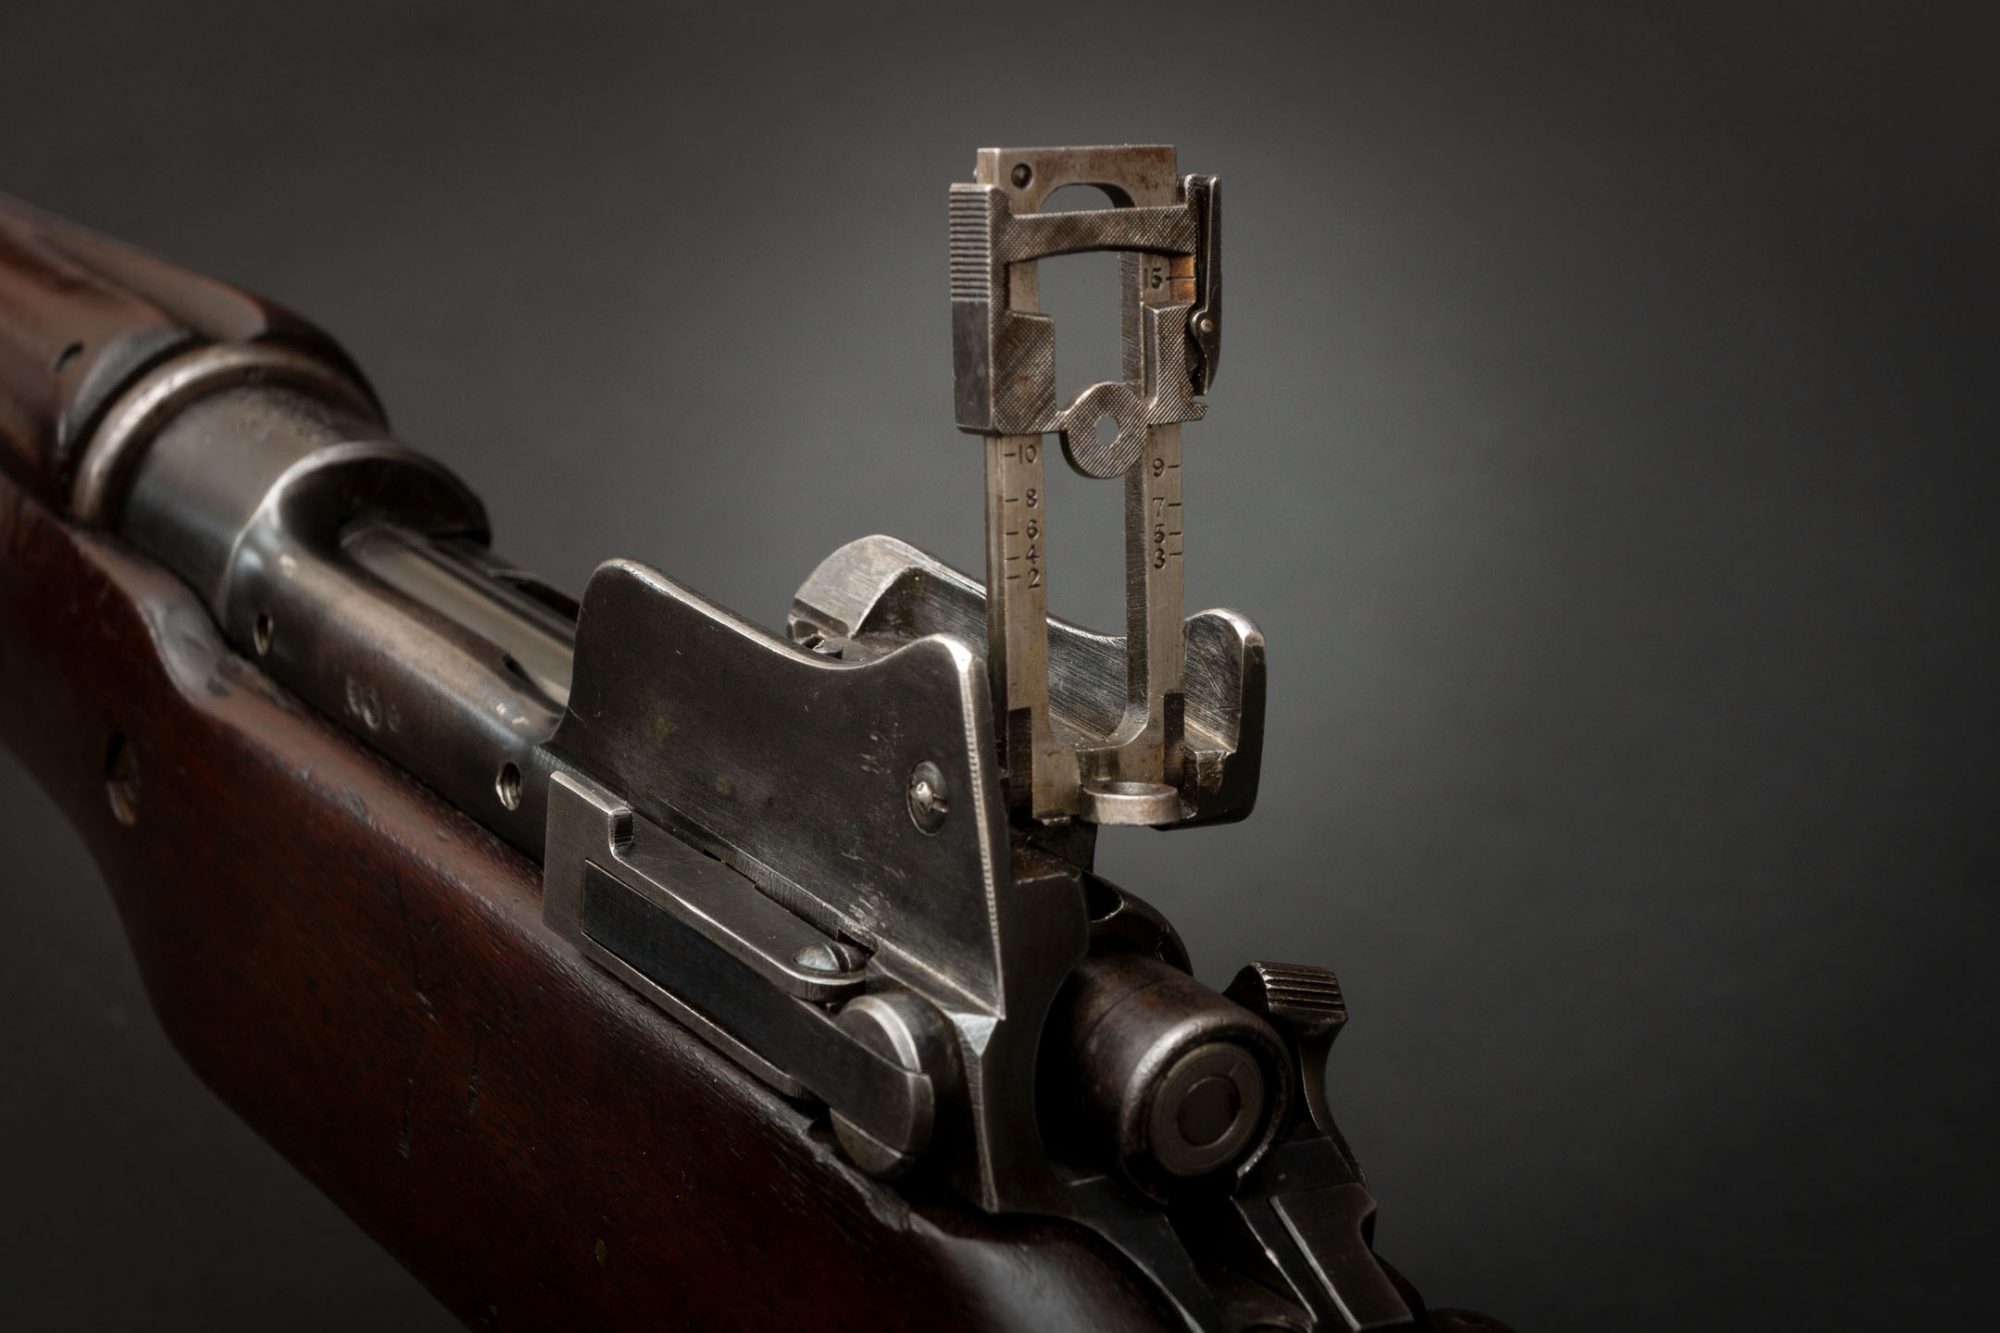 Winchester M1917 in .30-06 Springfield, for sale by Turnbull Restoration Co. of Bloomfield, NY